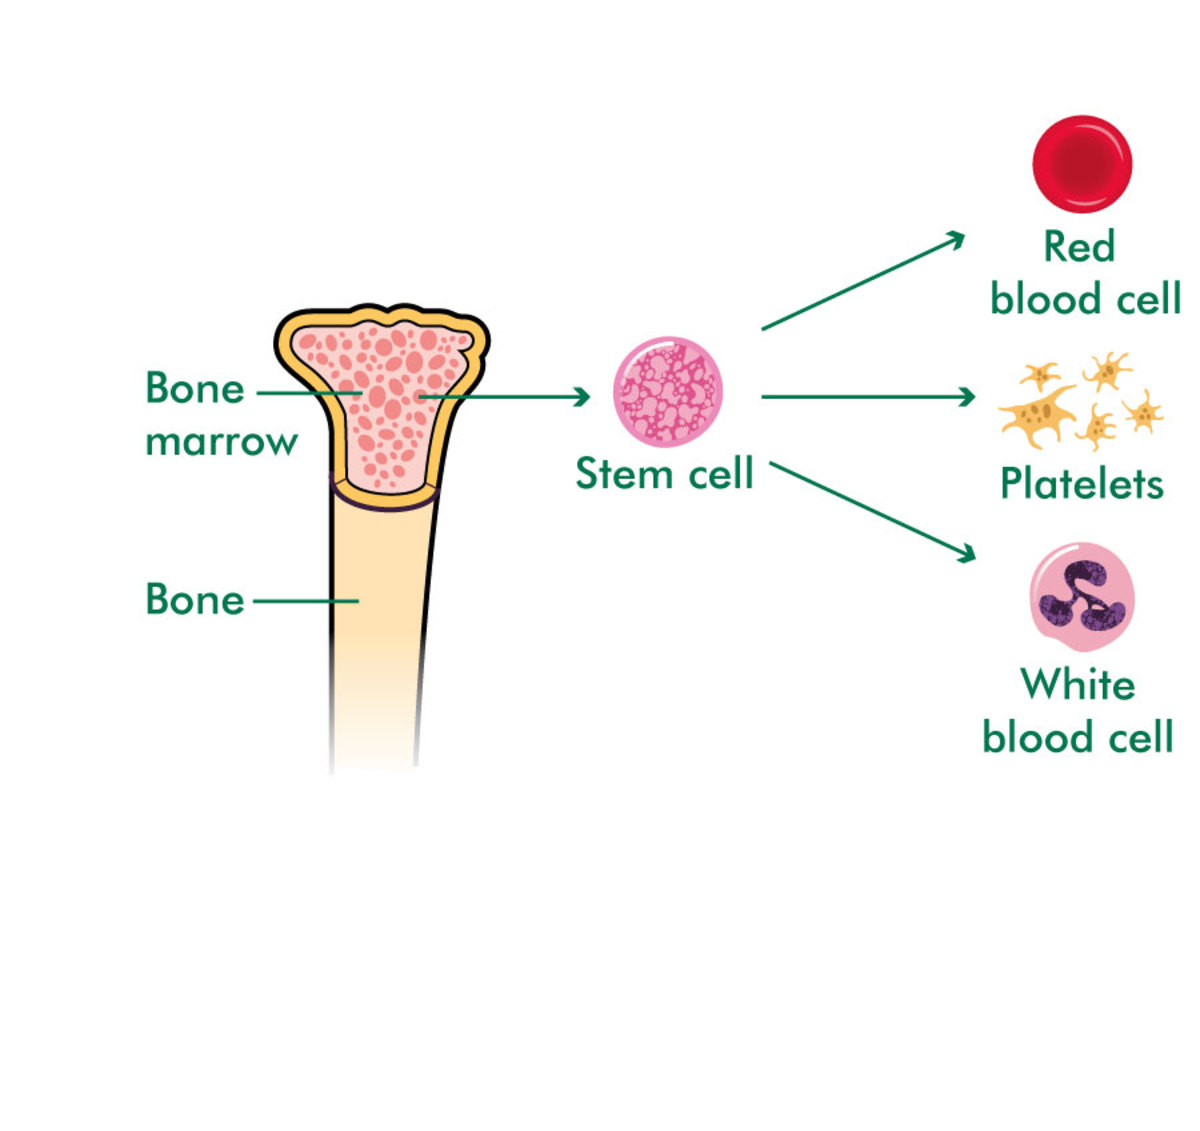 Bonemarrow - the site of cell manufacturing